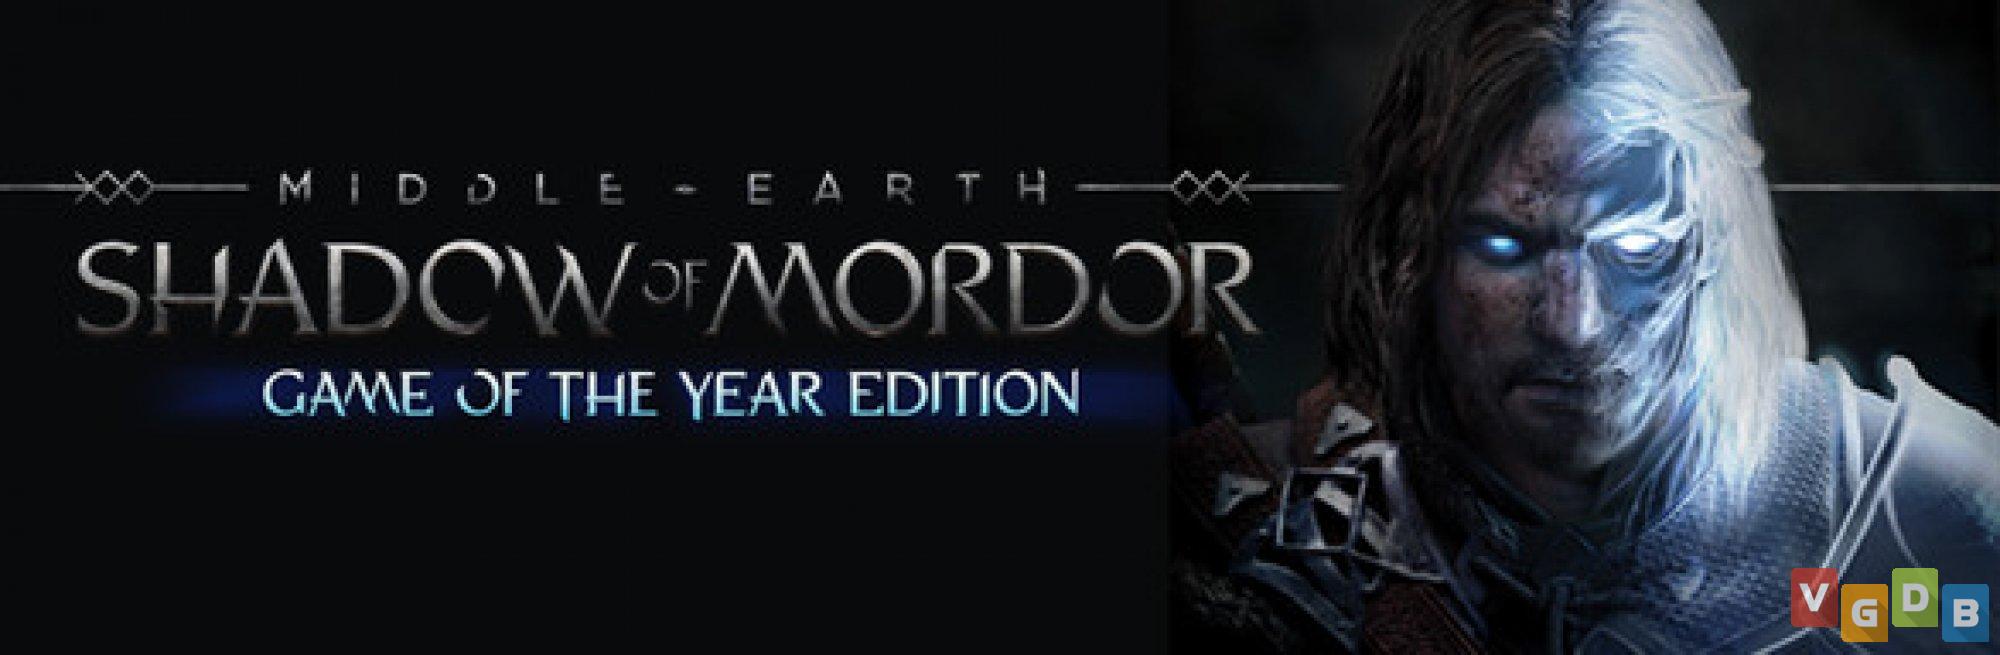 Middle earth shadow of mordor steam фото 75